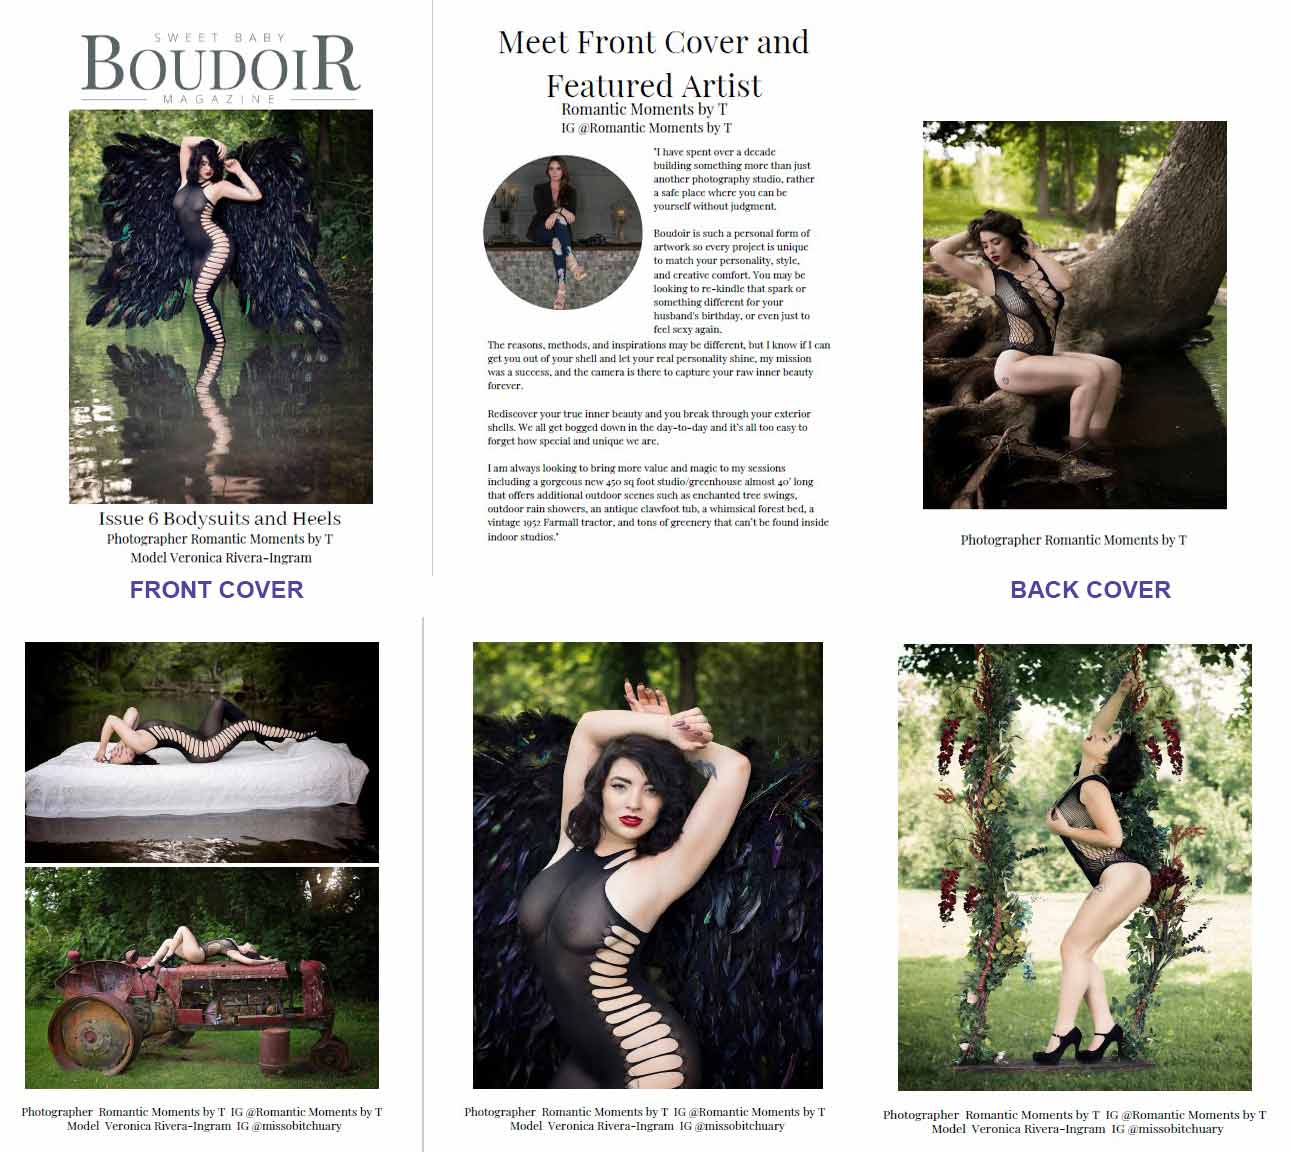 Sweet Baby Boudoir Magazine - Front Cover & Featured Artist